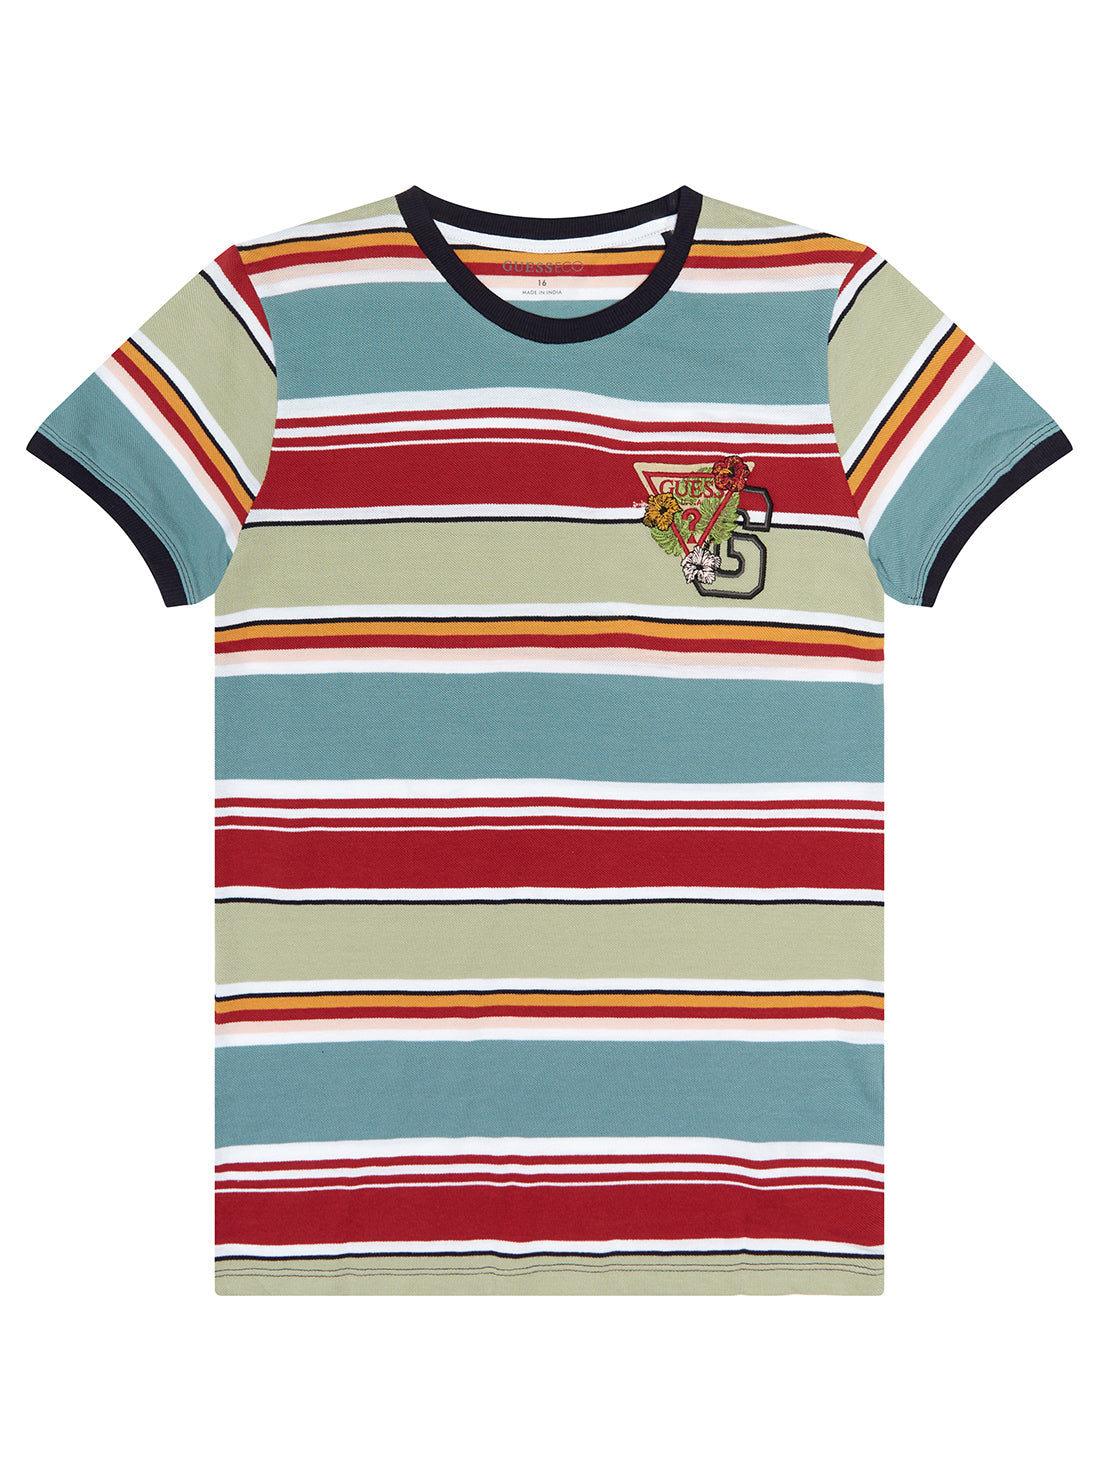 Boy's Red and Orange Stripe Logo T-Shirt (7-16) | GUESS Kids | front view